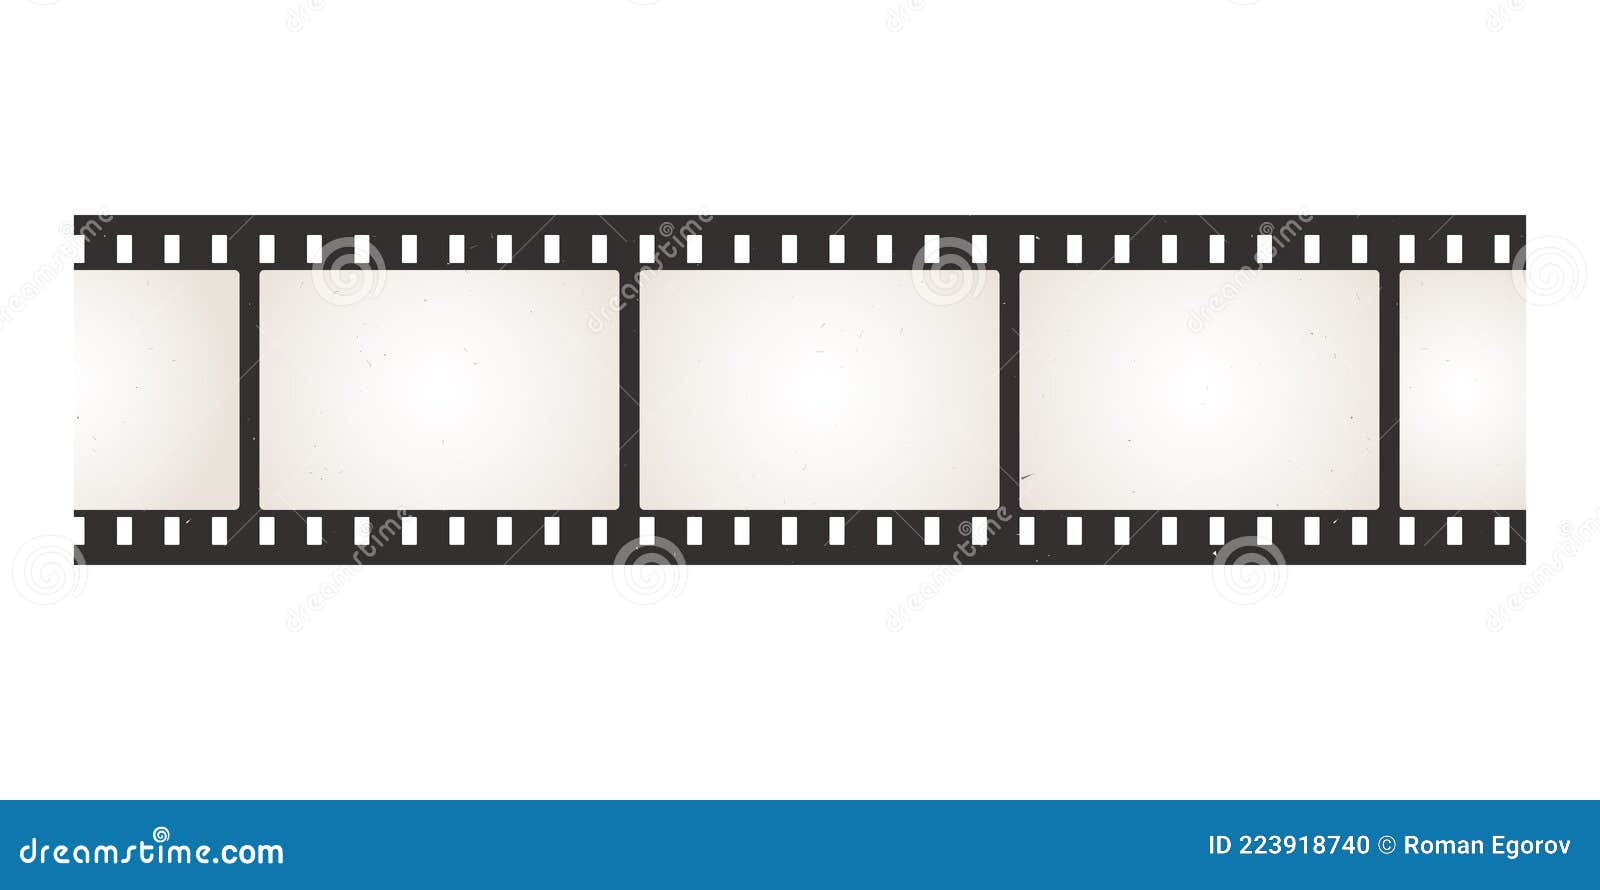 filmstrip. photo and movie camera negative. film roll with perforation. blank snapshot celluloid tape border